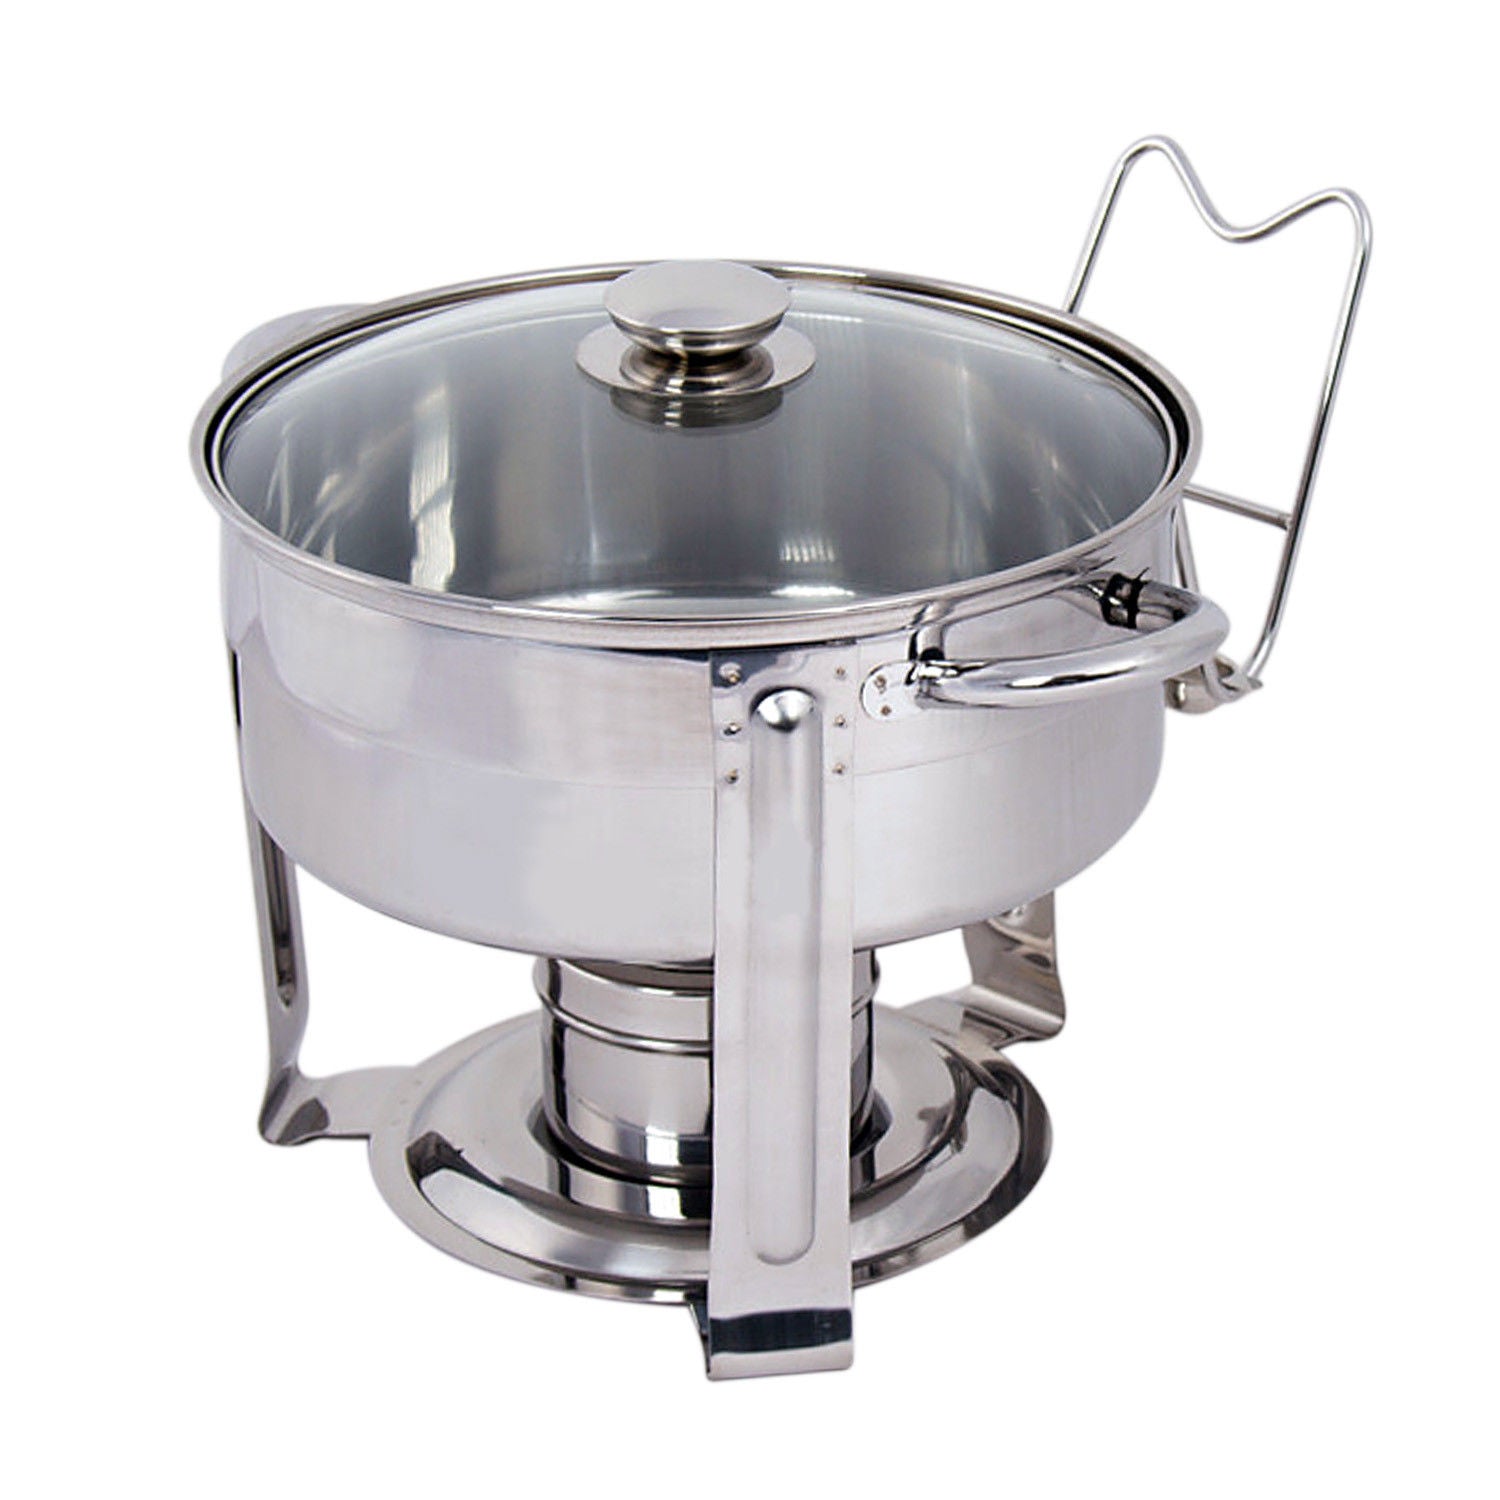 Stainless Steel Chafing Dish Set 4.5 QT Party Buffet Round Chafing Dish Pot Set